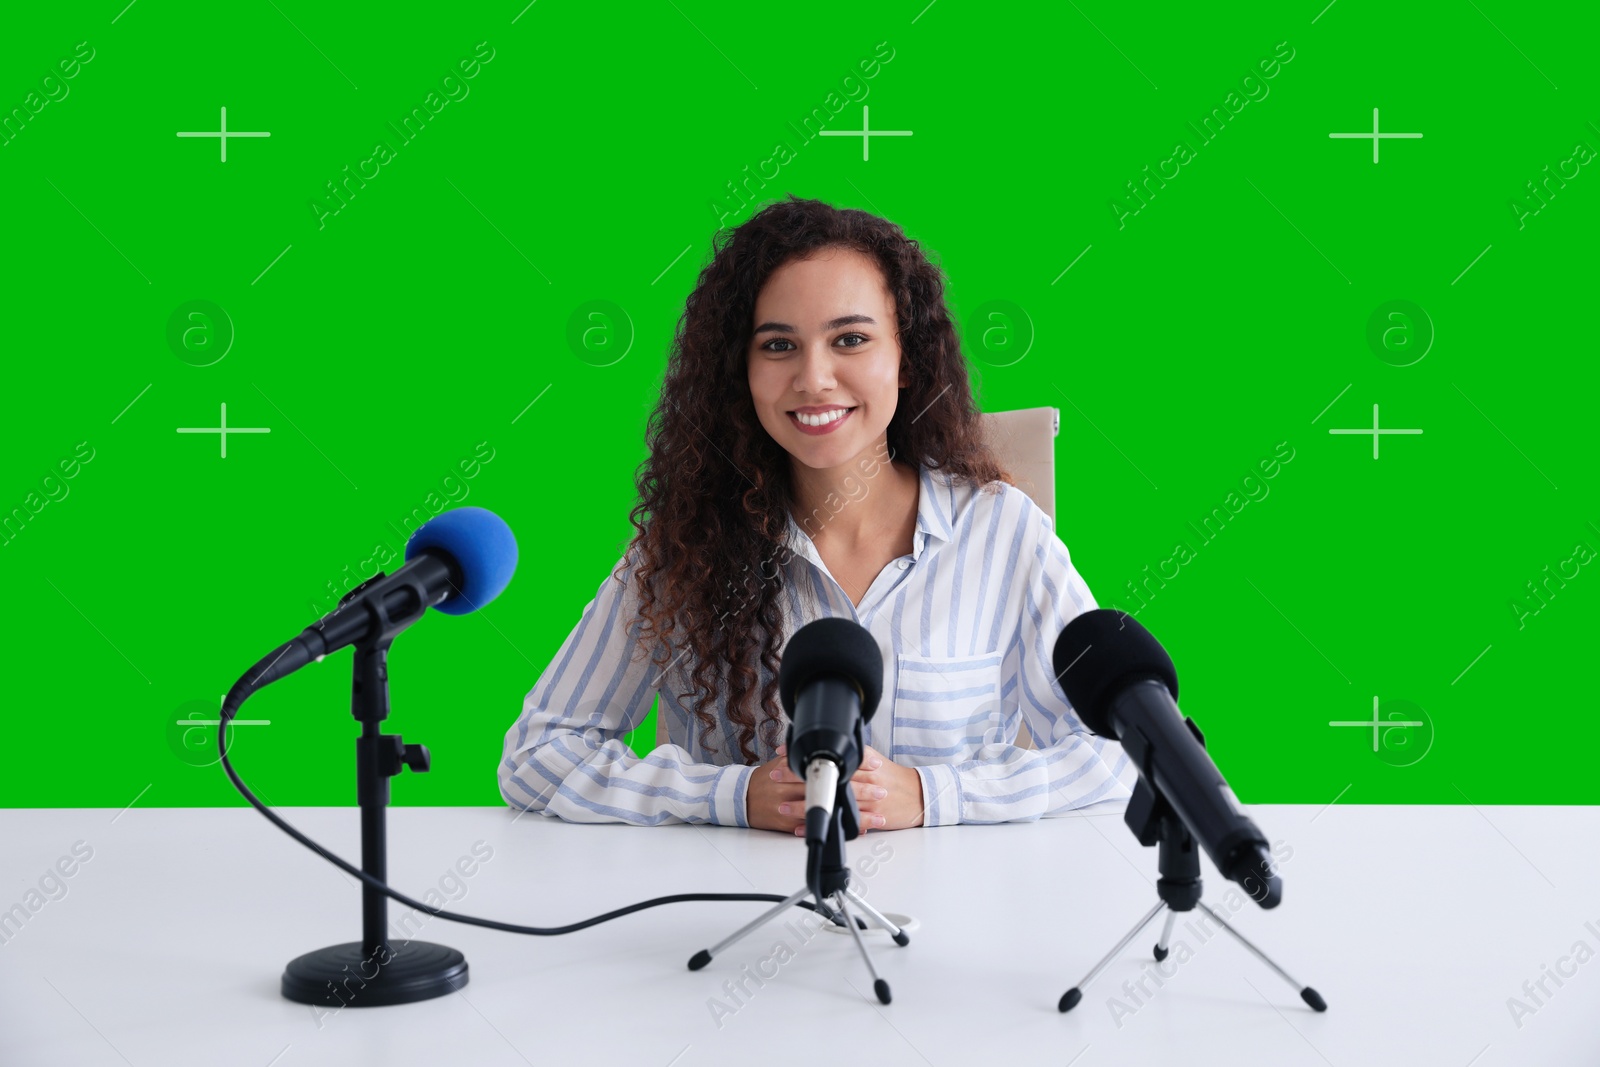 Image of Chroma key compositing. Woman giving interview during news conference. Green screen behind her